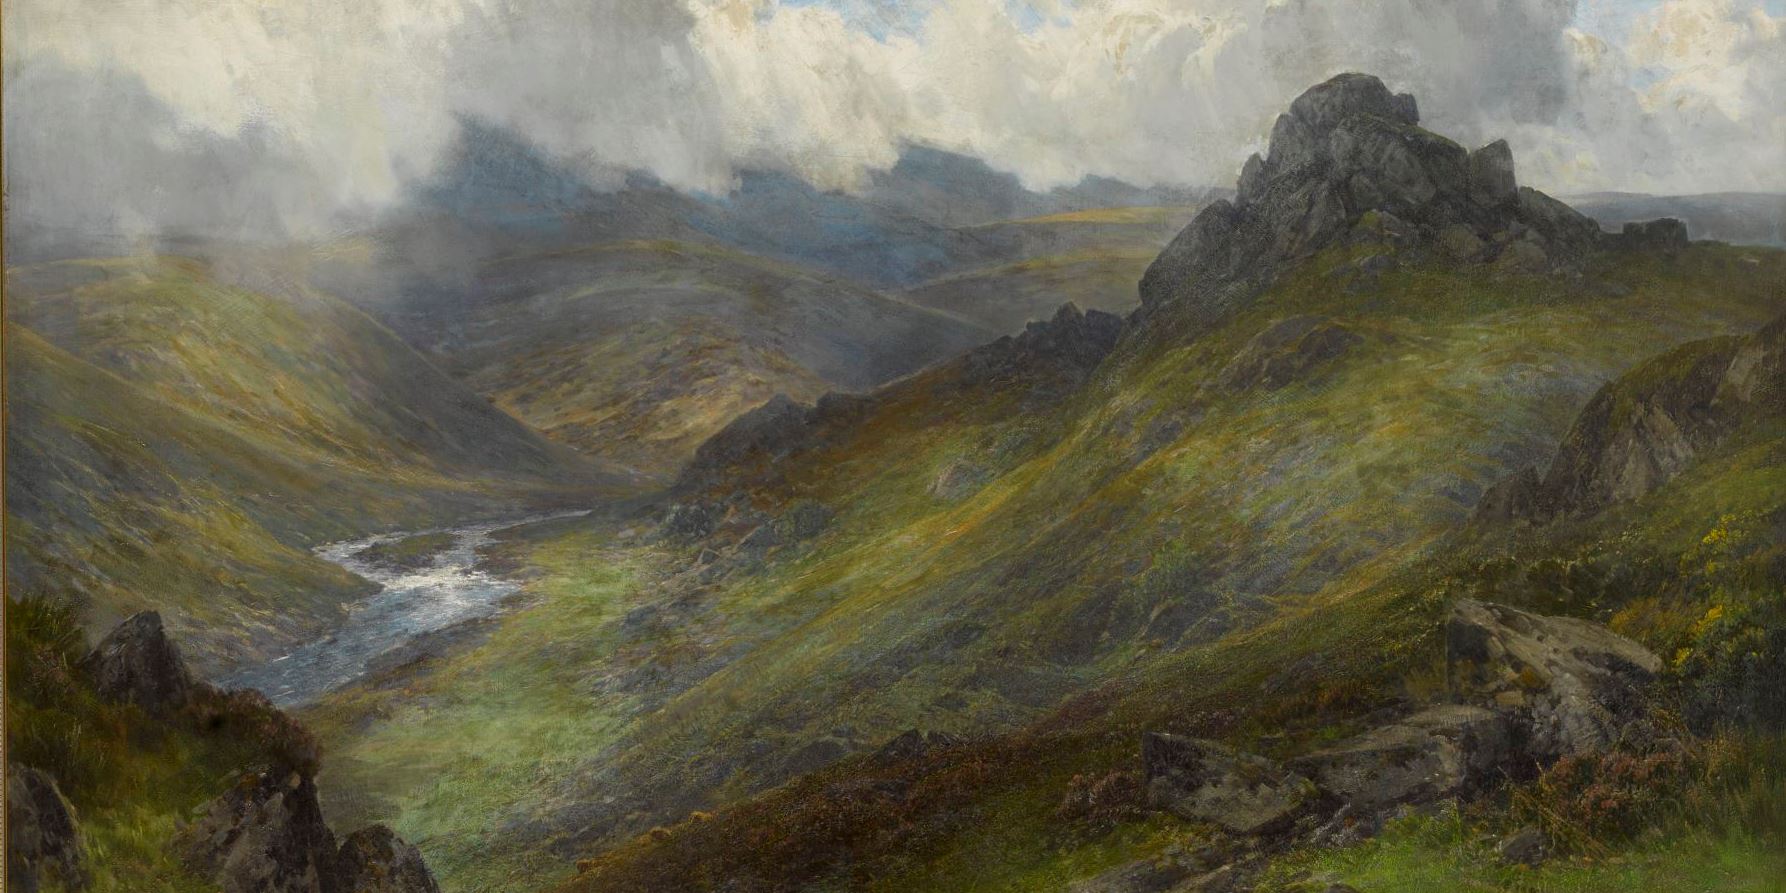 Moorland scene by Widgery-courtesy of Exeter RAMM